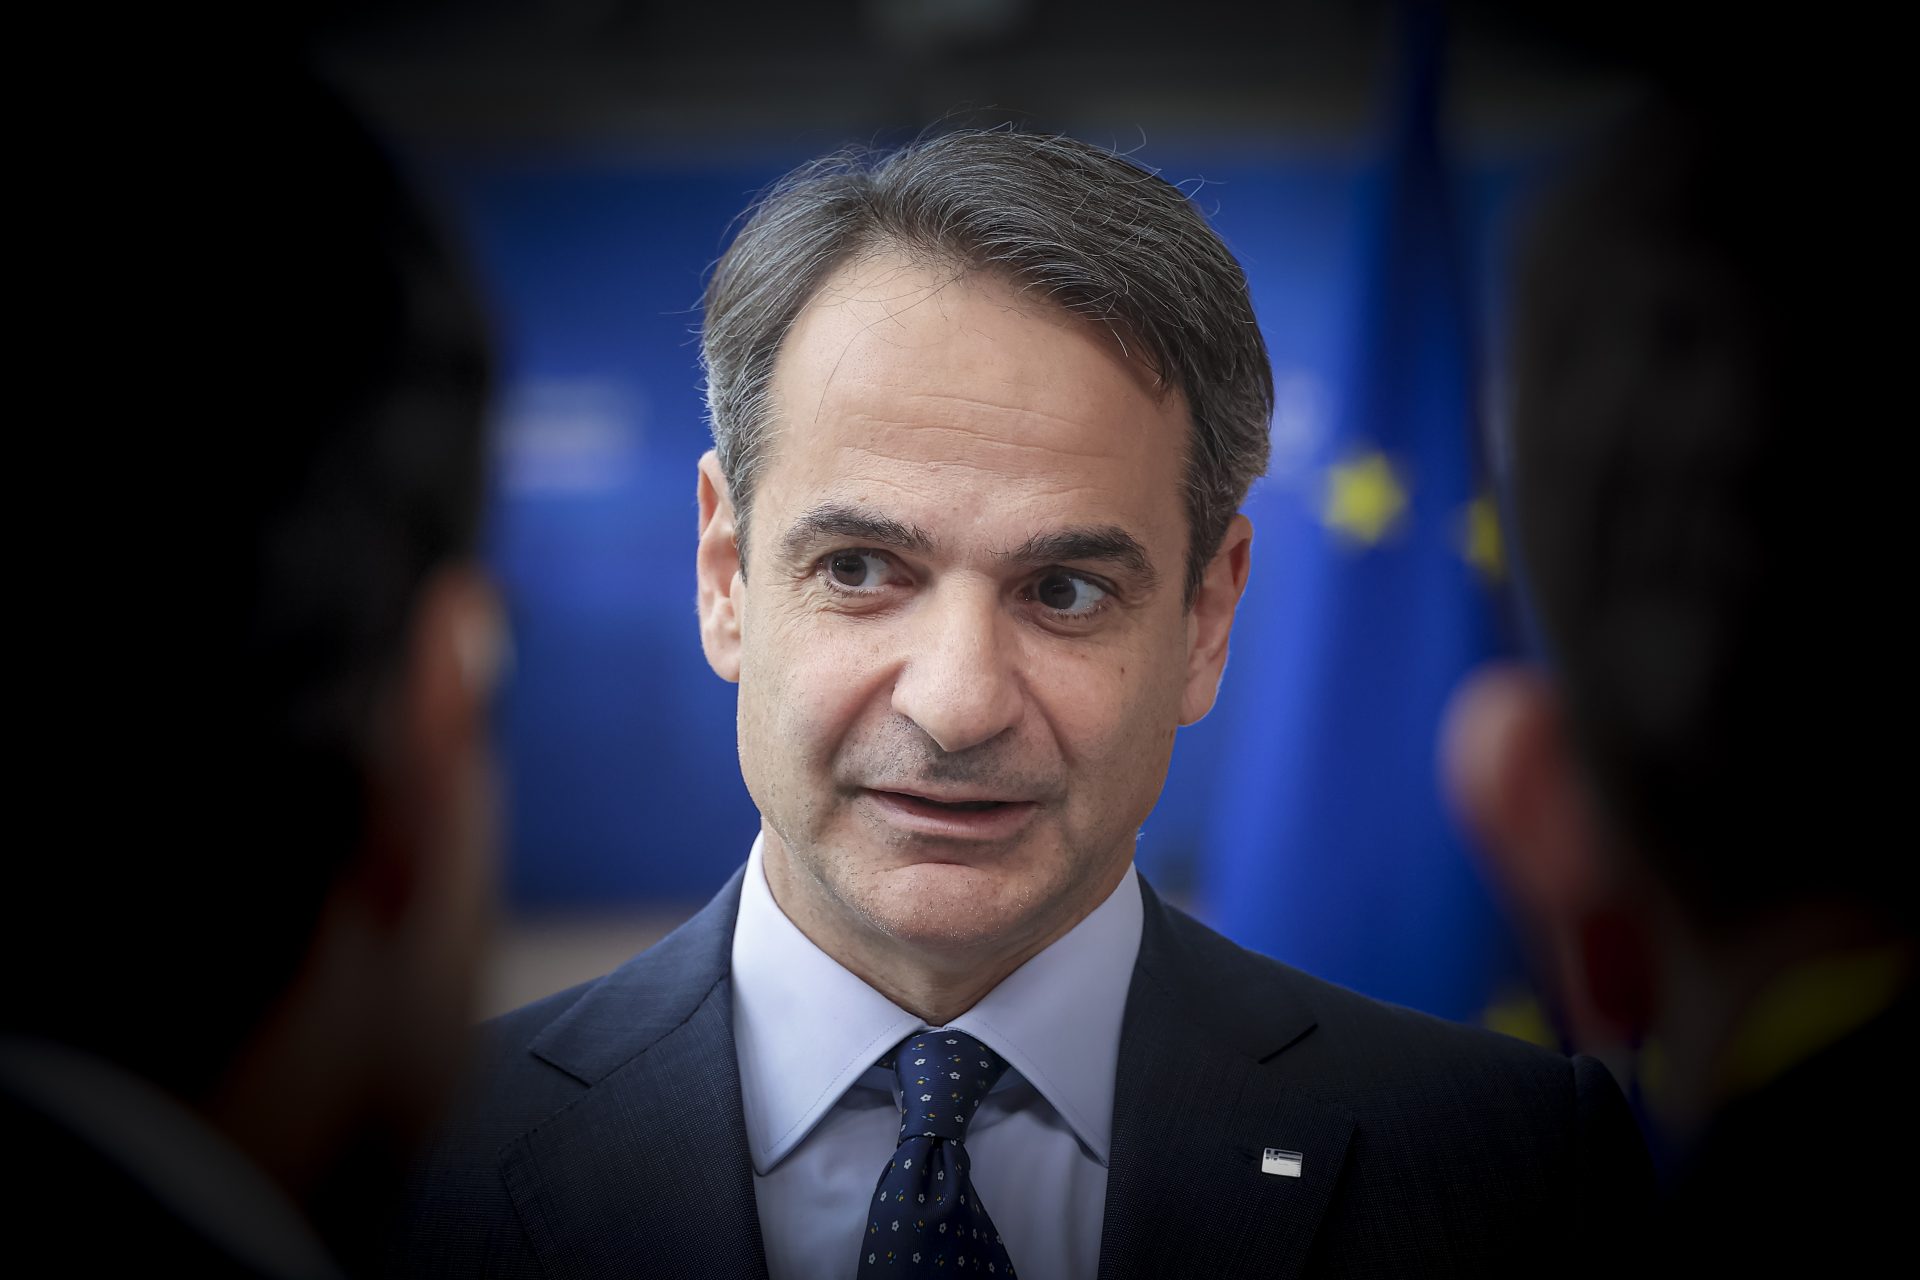 Mitsotakis: Why is Sunak afraid of opposing arguments? 